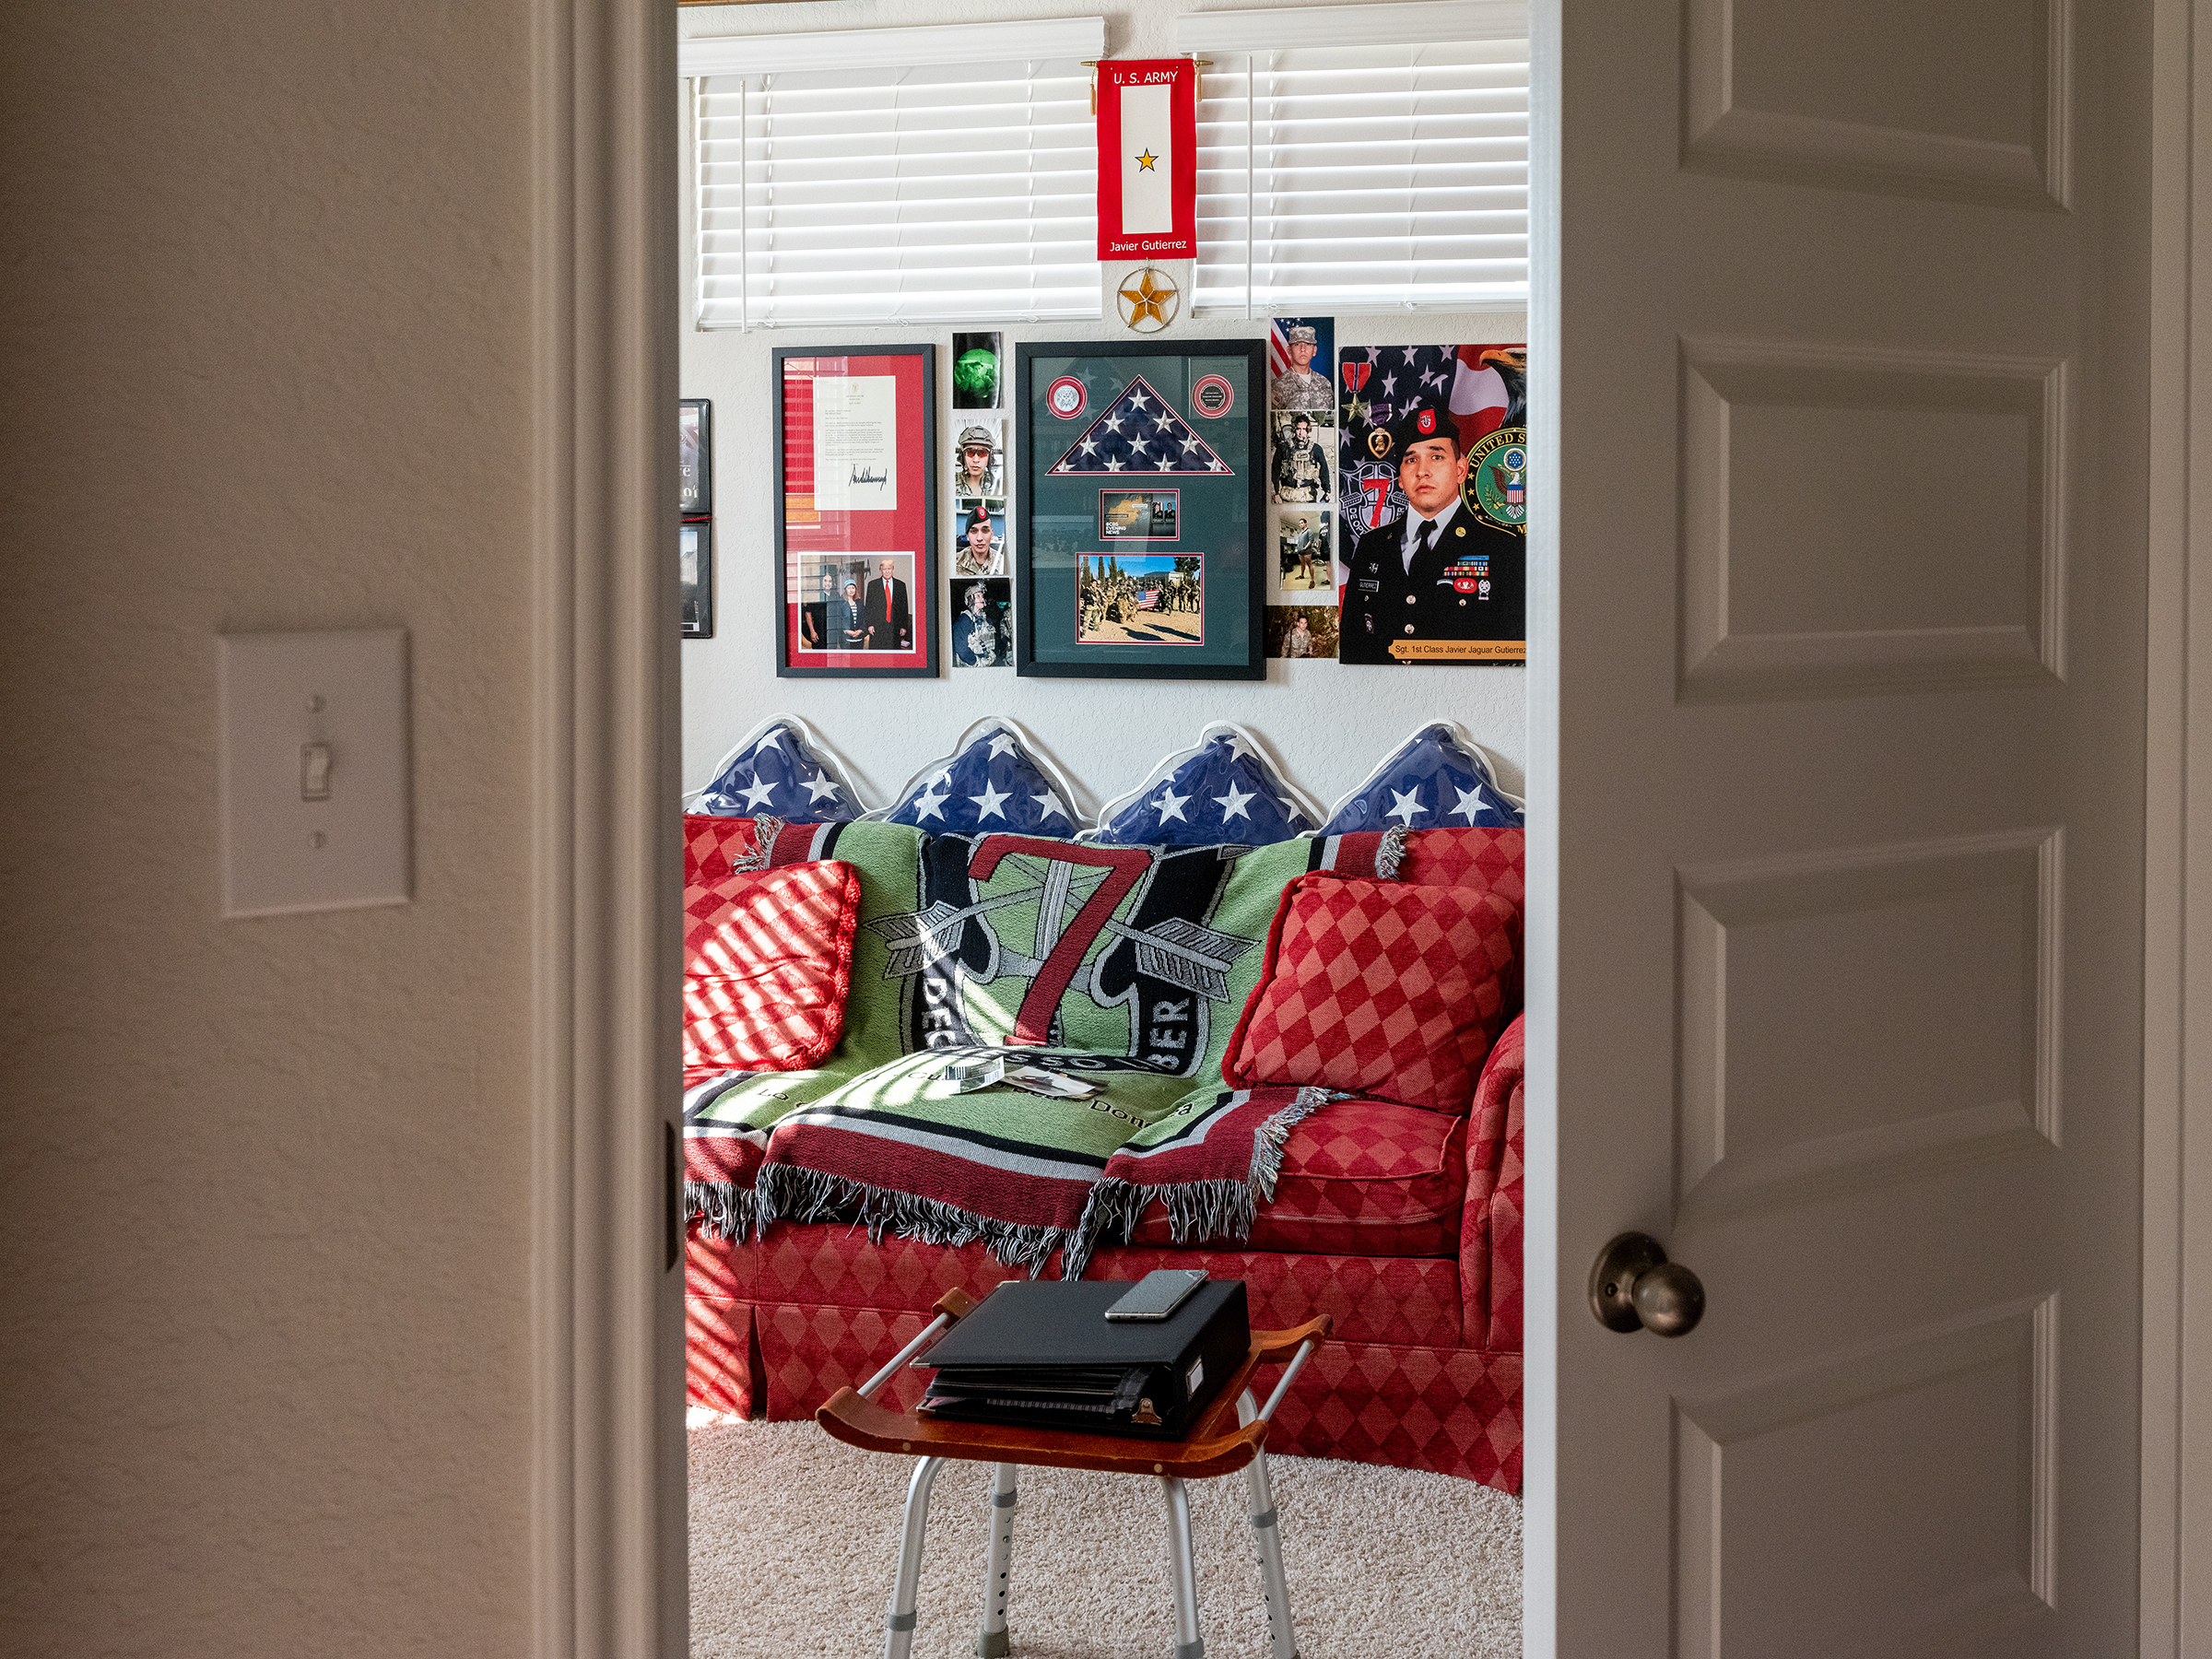 In San Antonio, Texas, on Aug. 26, the sunroom in the two-story brick home of Sergeant First Class Javier Jaguar Gutierrez's parents is decorated with remembrances of their fallen son, an American service member who was killed in February 2020 by an Afghan soldier just weeks before a peace deal was signed between the U.S. and the Taliban. He was <a href="https://time.com/6094290/grieving-american-soldier-killed-in-afghanistan/">one of the last U.S. soldiers</a> killed in Afghanistan. (Peter van Agtmael—Magnum Photos for TIME)